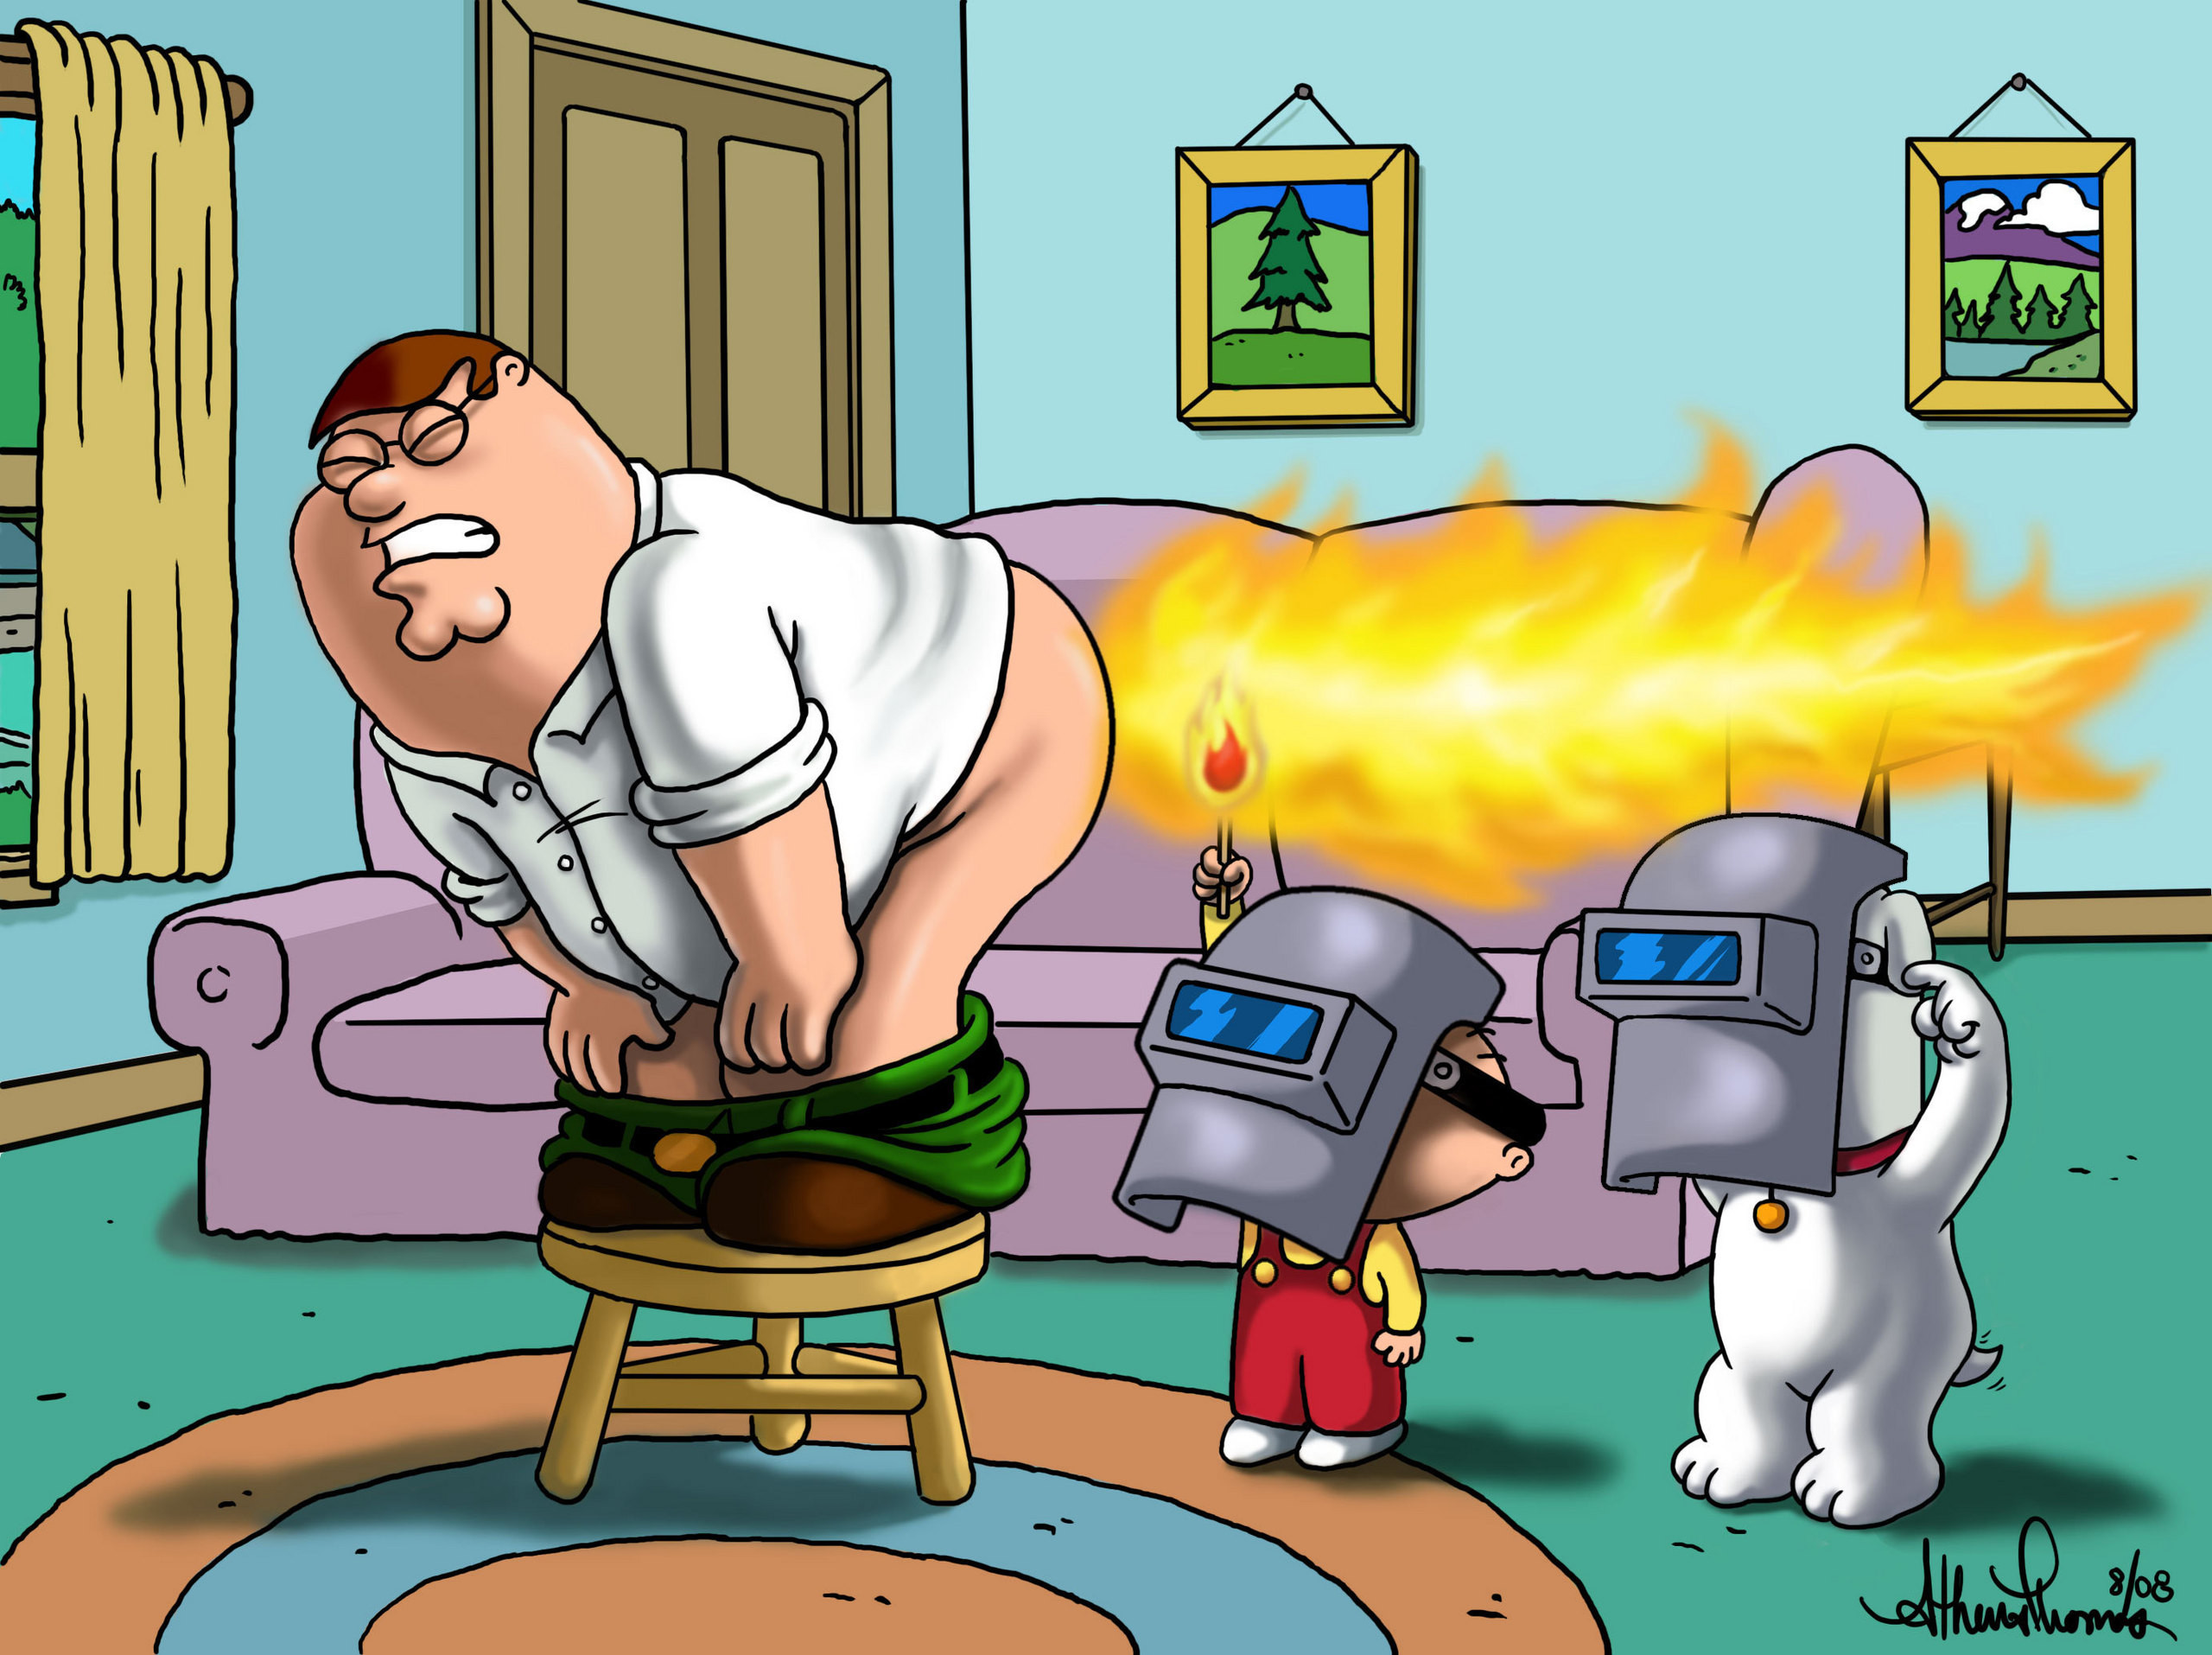 2560x1915, Family Guy Characters Images Family Guy - Family Guy Fart On Fire - HD Wallpaper 